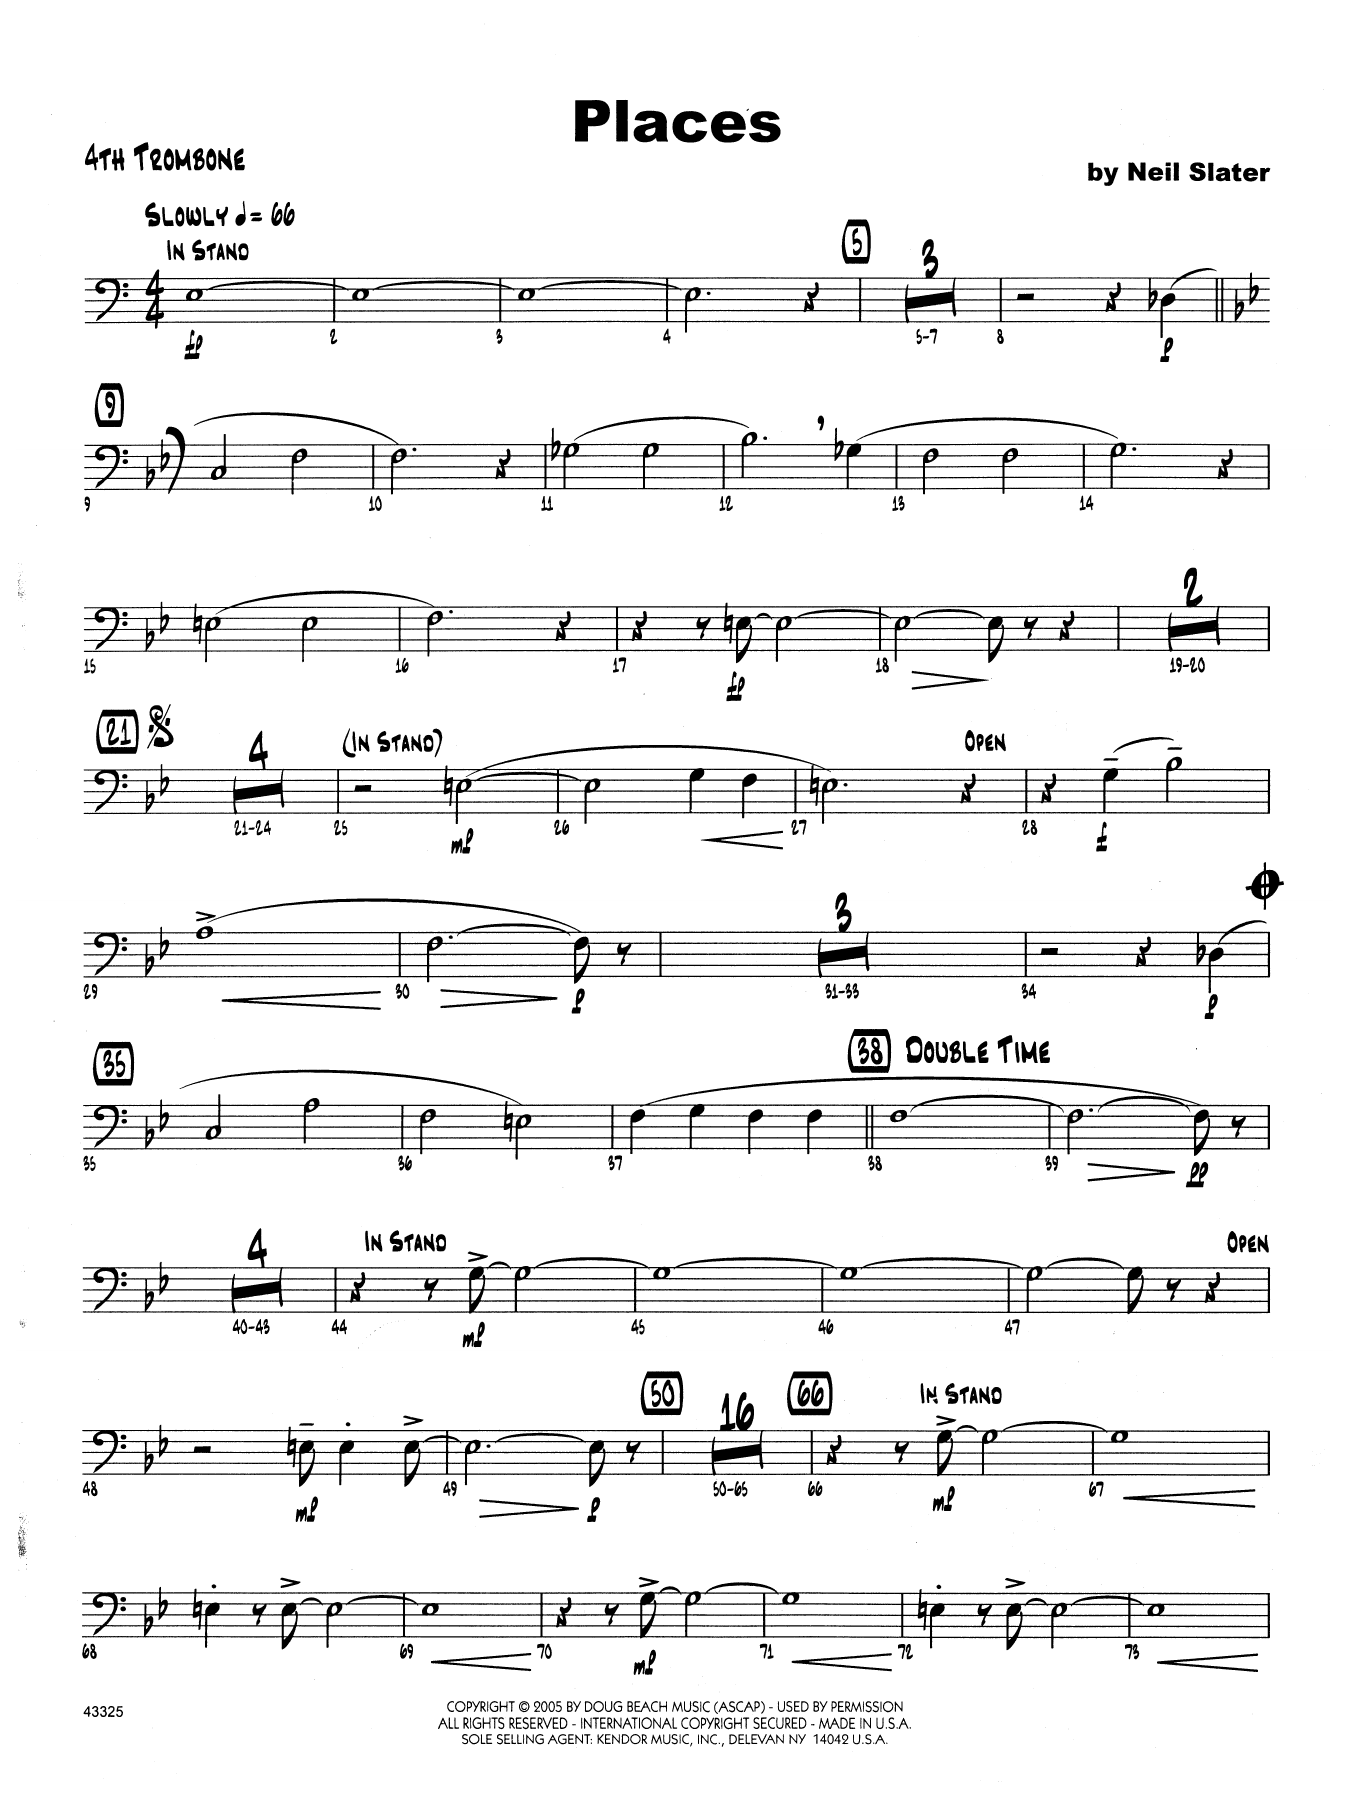 Download Neil Slater Places - 4th Trombone Sheet Music